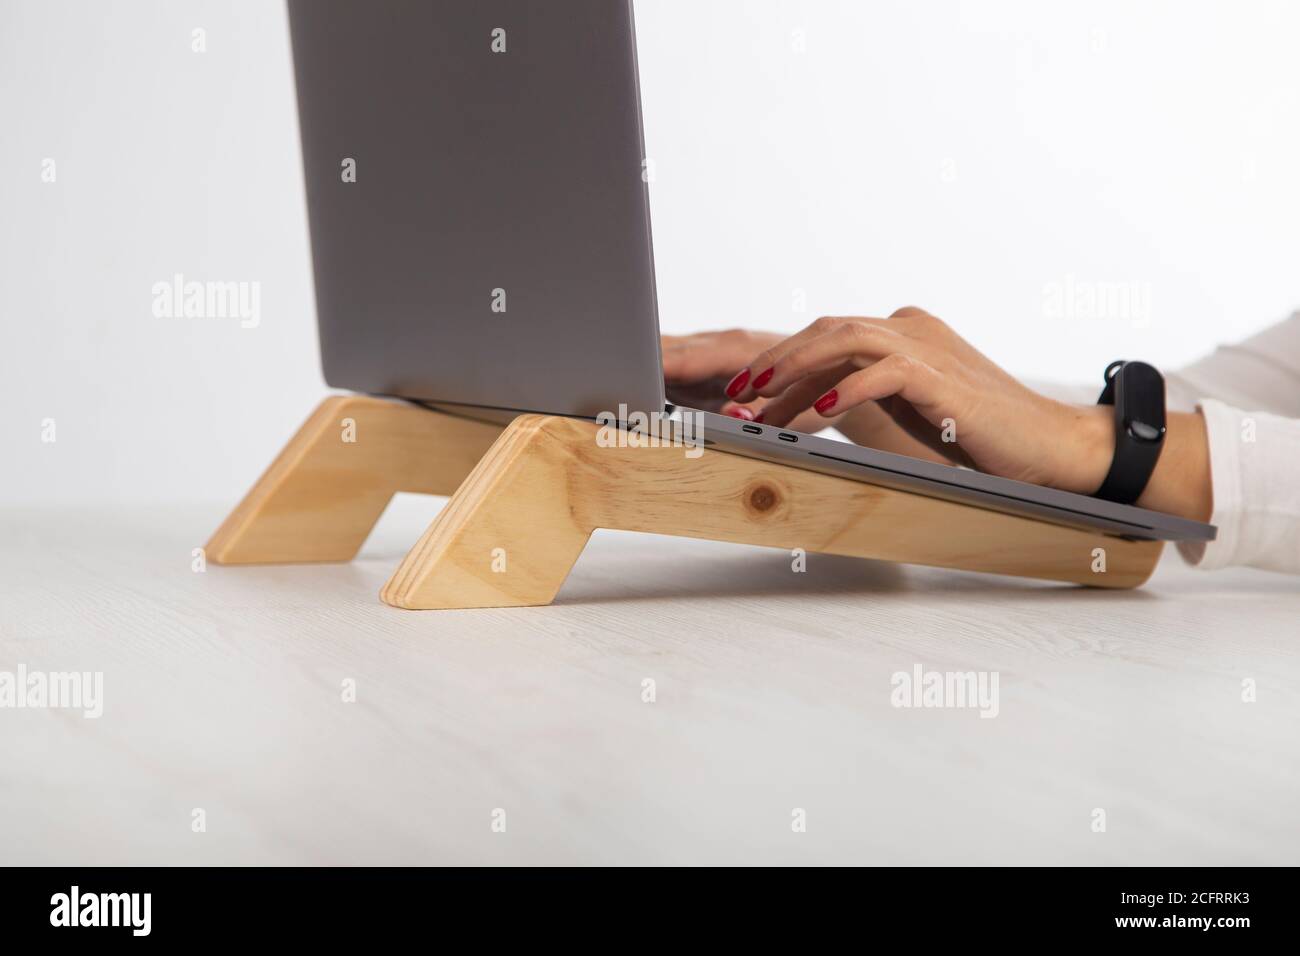 hands of a woman typing on a gray laptop with a wooden stand on a desk Stock Photo